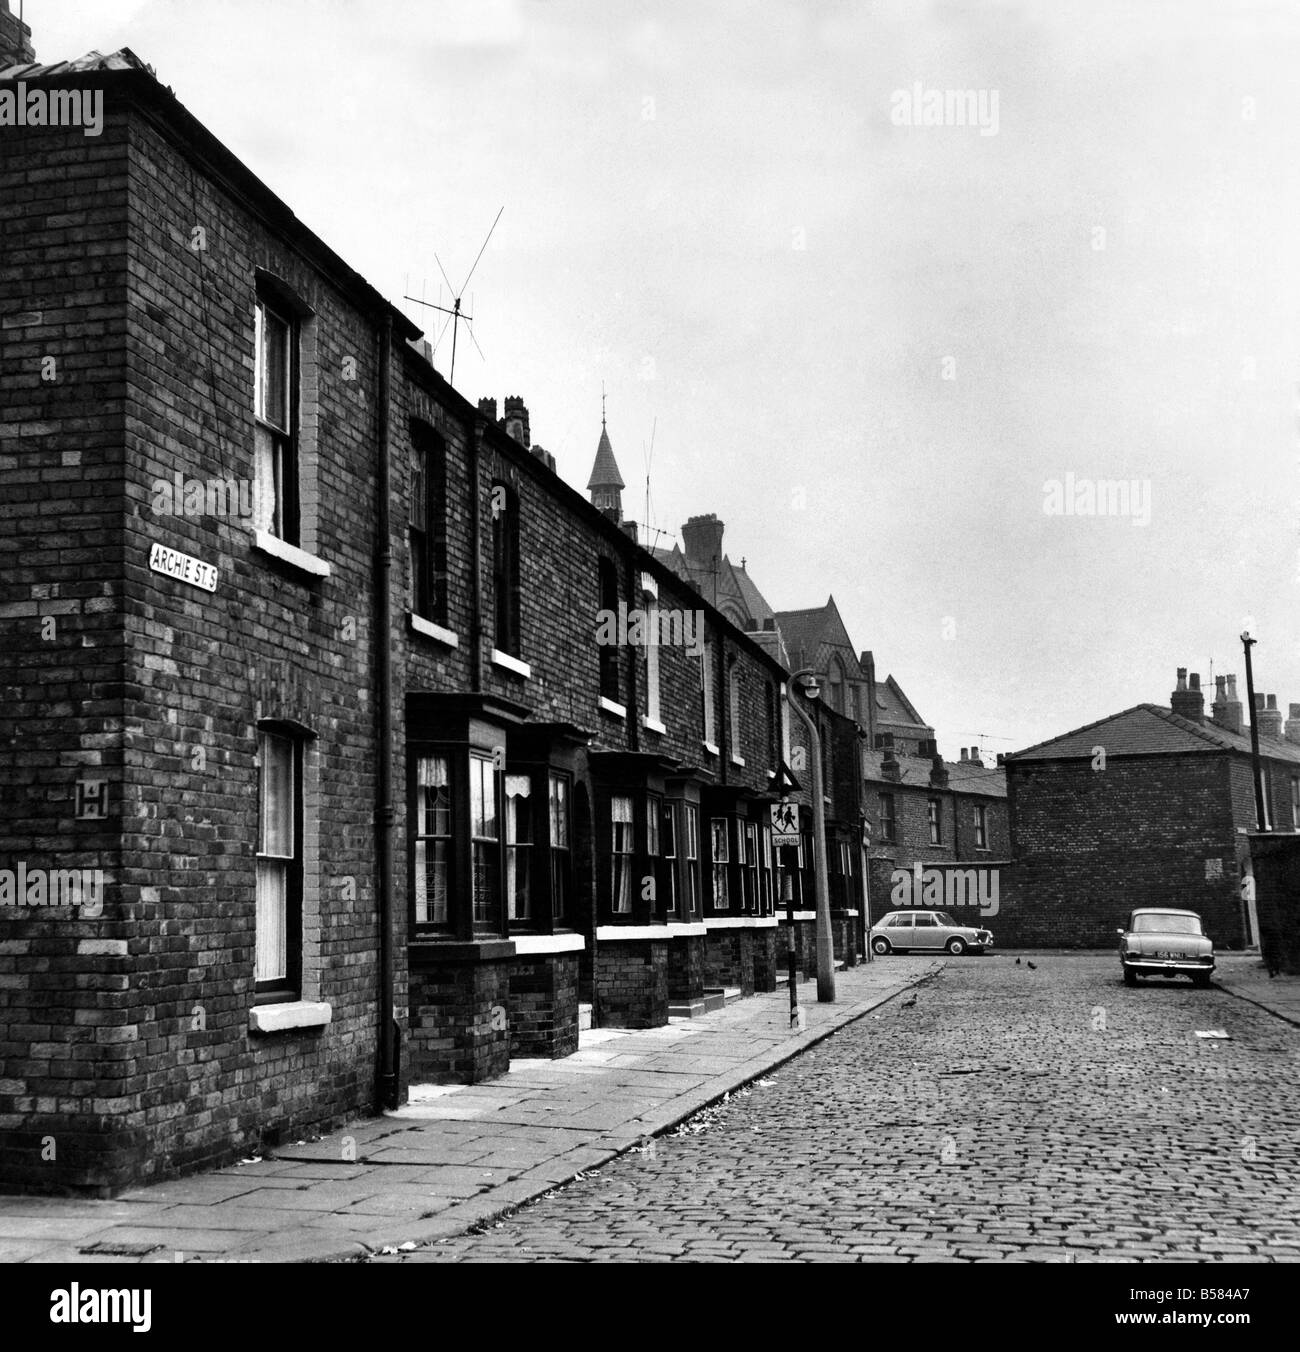 Archie St. (Coronation St.) Salford. Views of Archie St. which is the ...